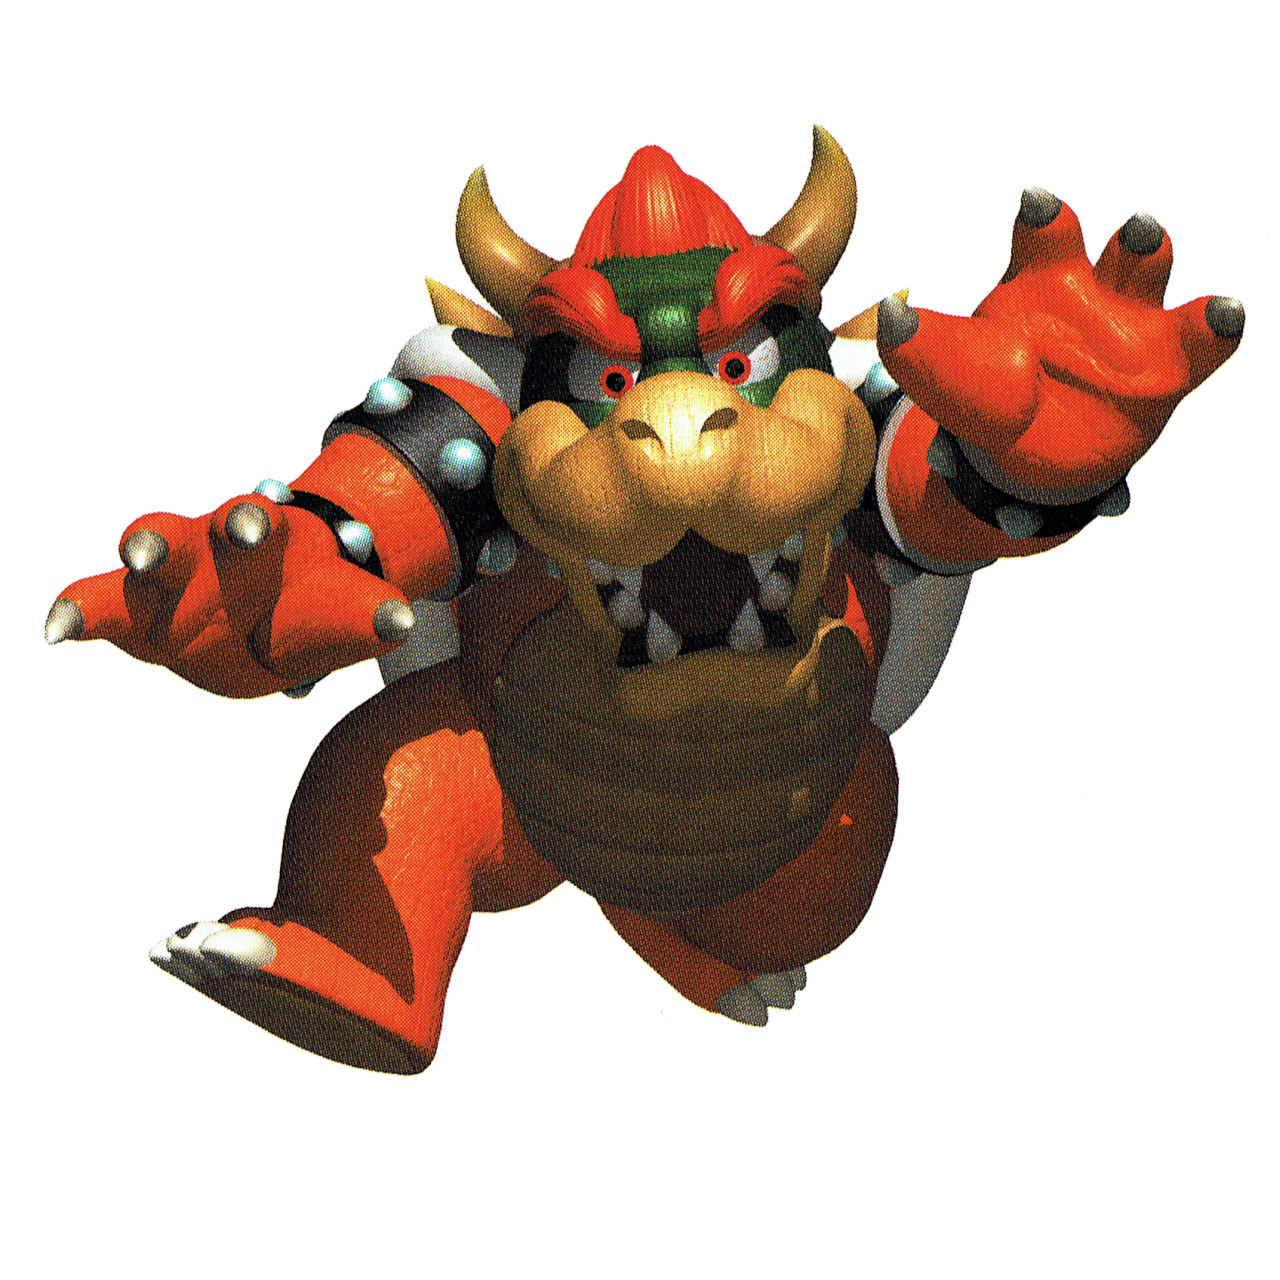 sm64 was the first time that character artwork was rendered in 3d for the f...